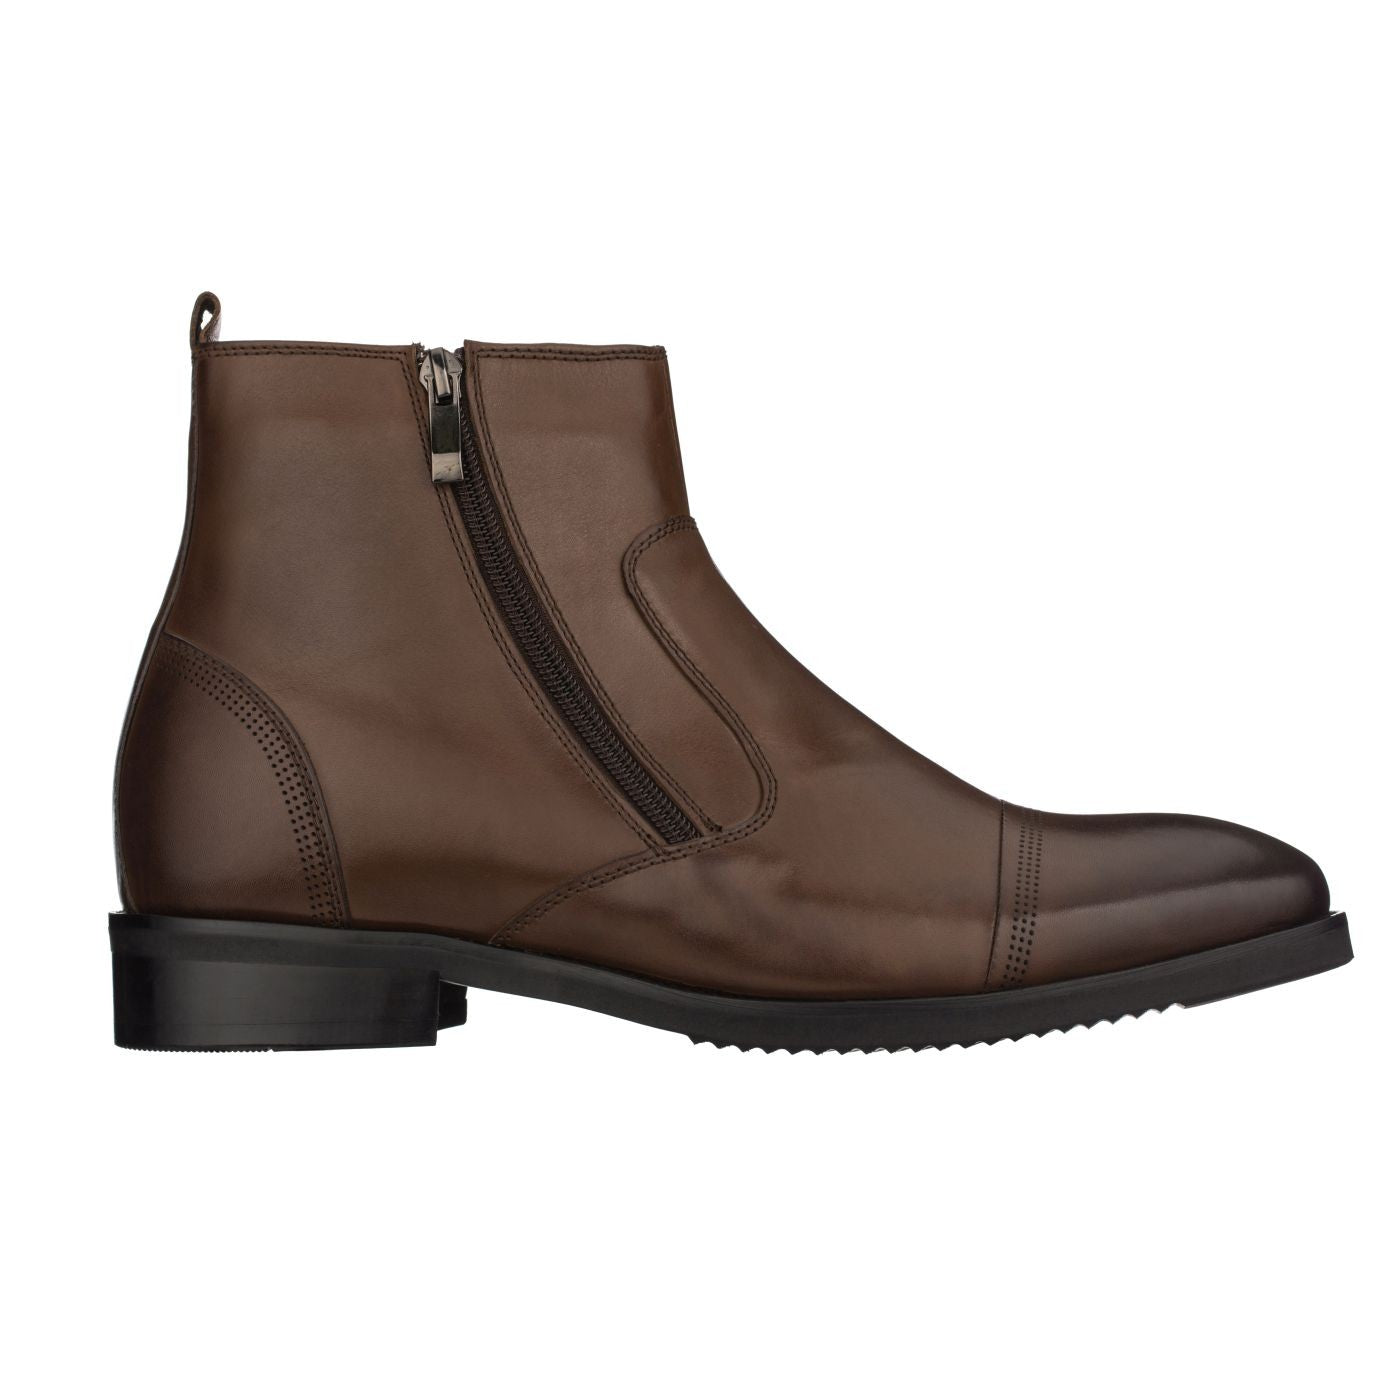 Elevator shoes height increase CALTO - S28002 - 2.8 Inches Taller (Dark Brown) - Lightweight - Zipper Boots